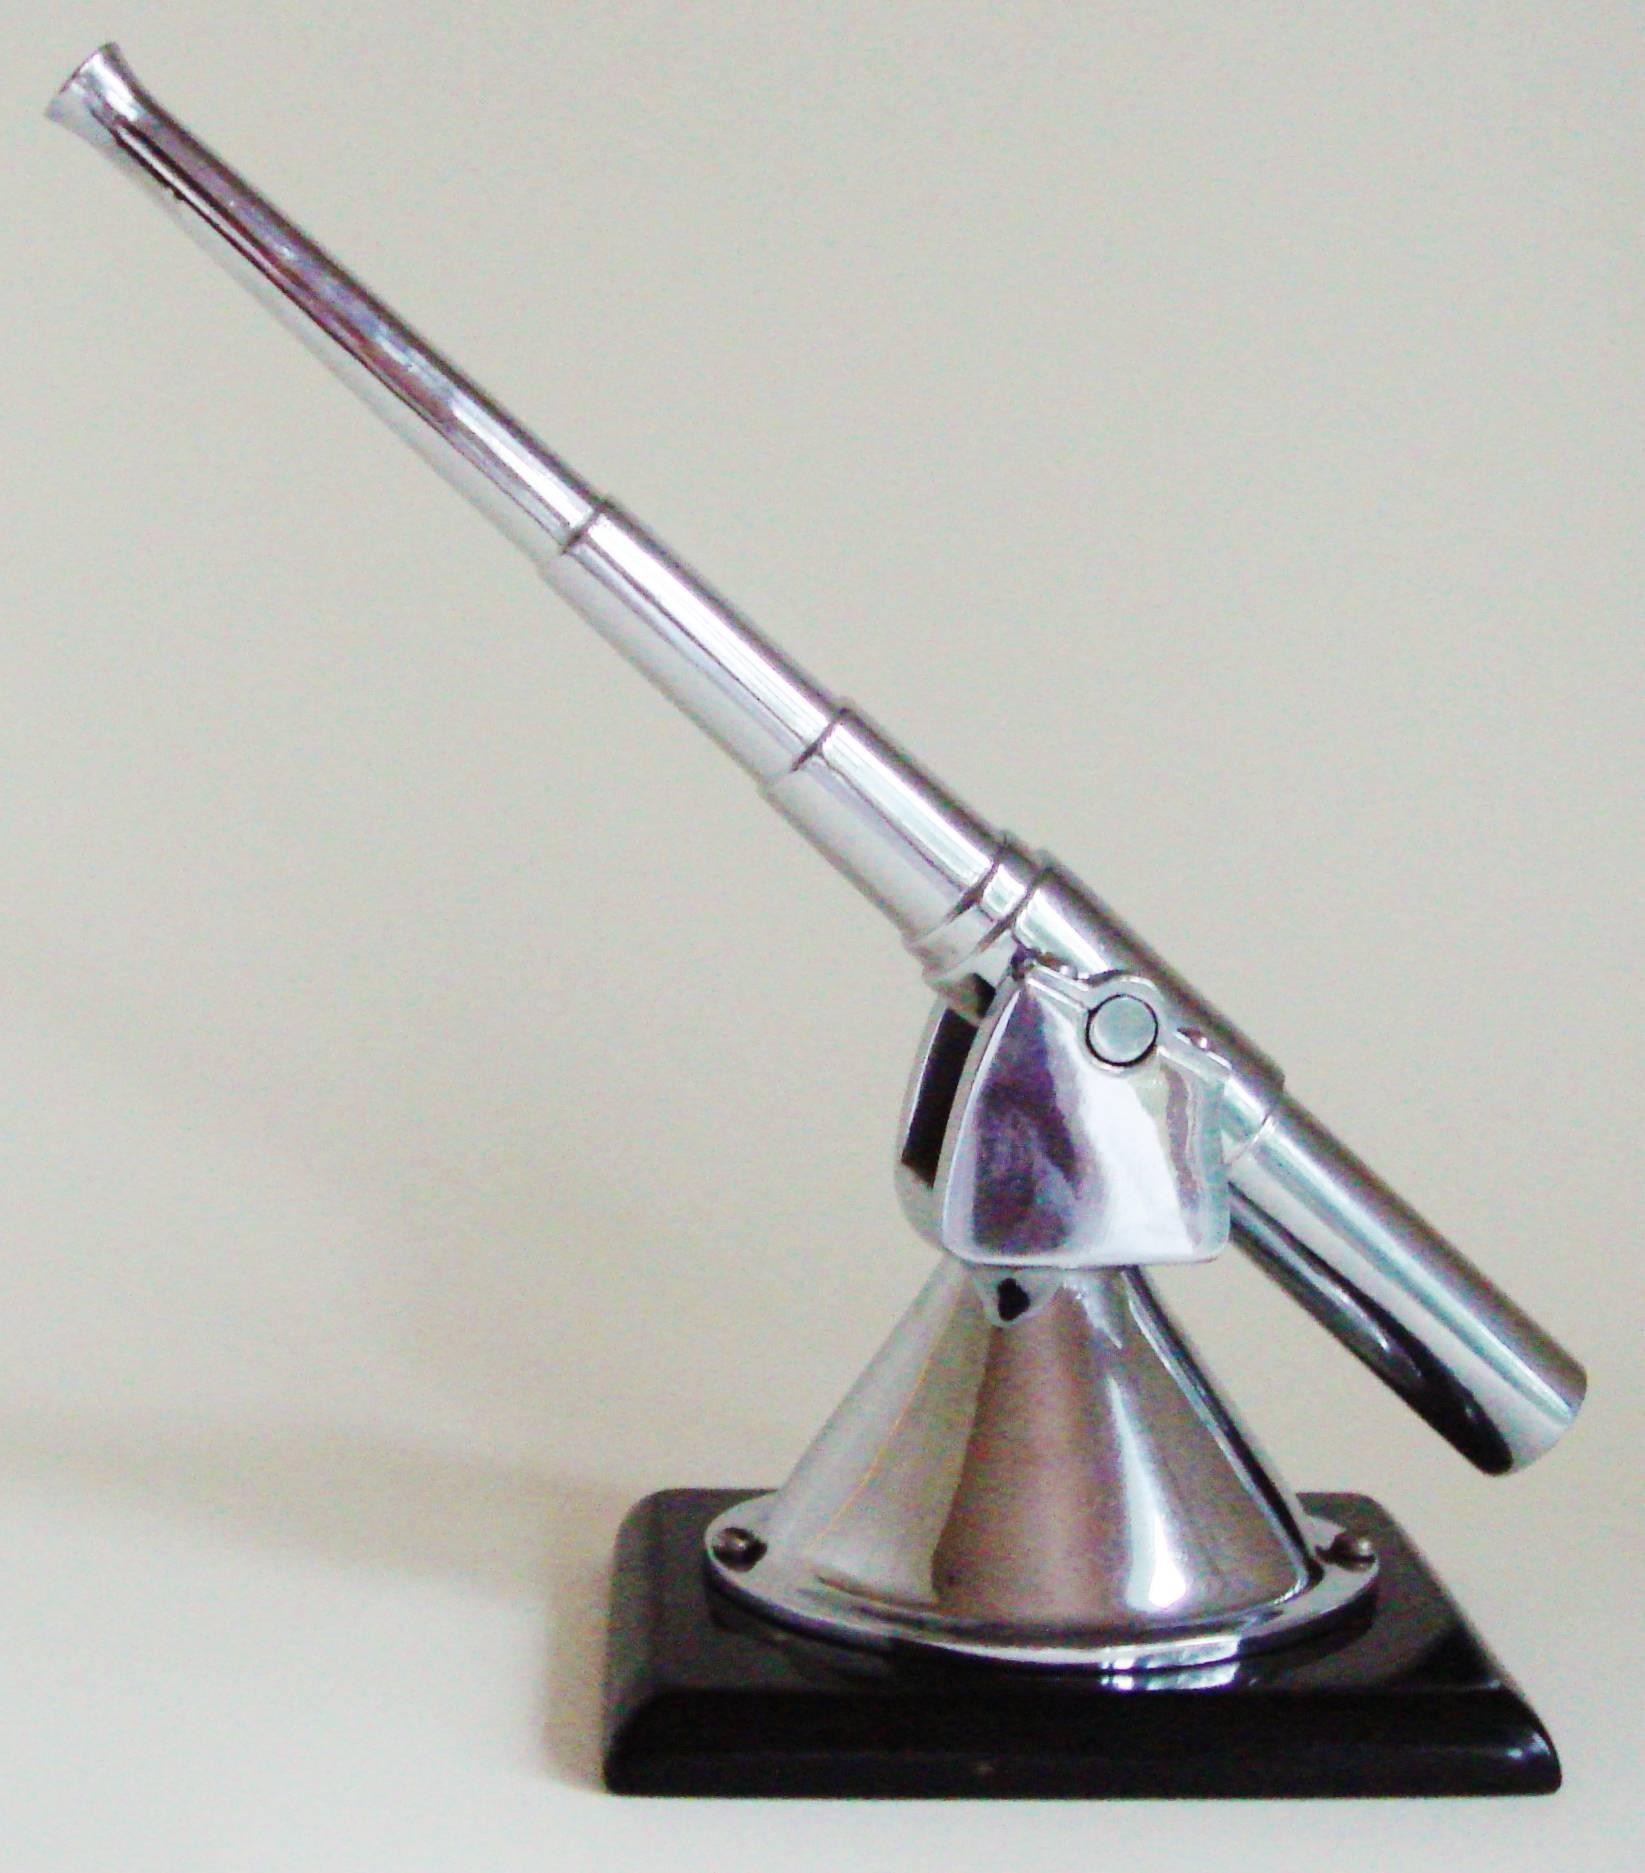 This very elegant English Art Deco styled desk model/paperweight of a WWII deck mounted anti-aircraft gun would seem to be loosely based on the Bofors 40mm. It is beautifully made in chrome plated steel and even includes the Bofors' signature flared